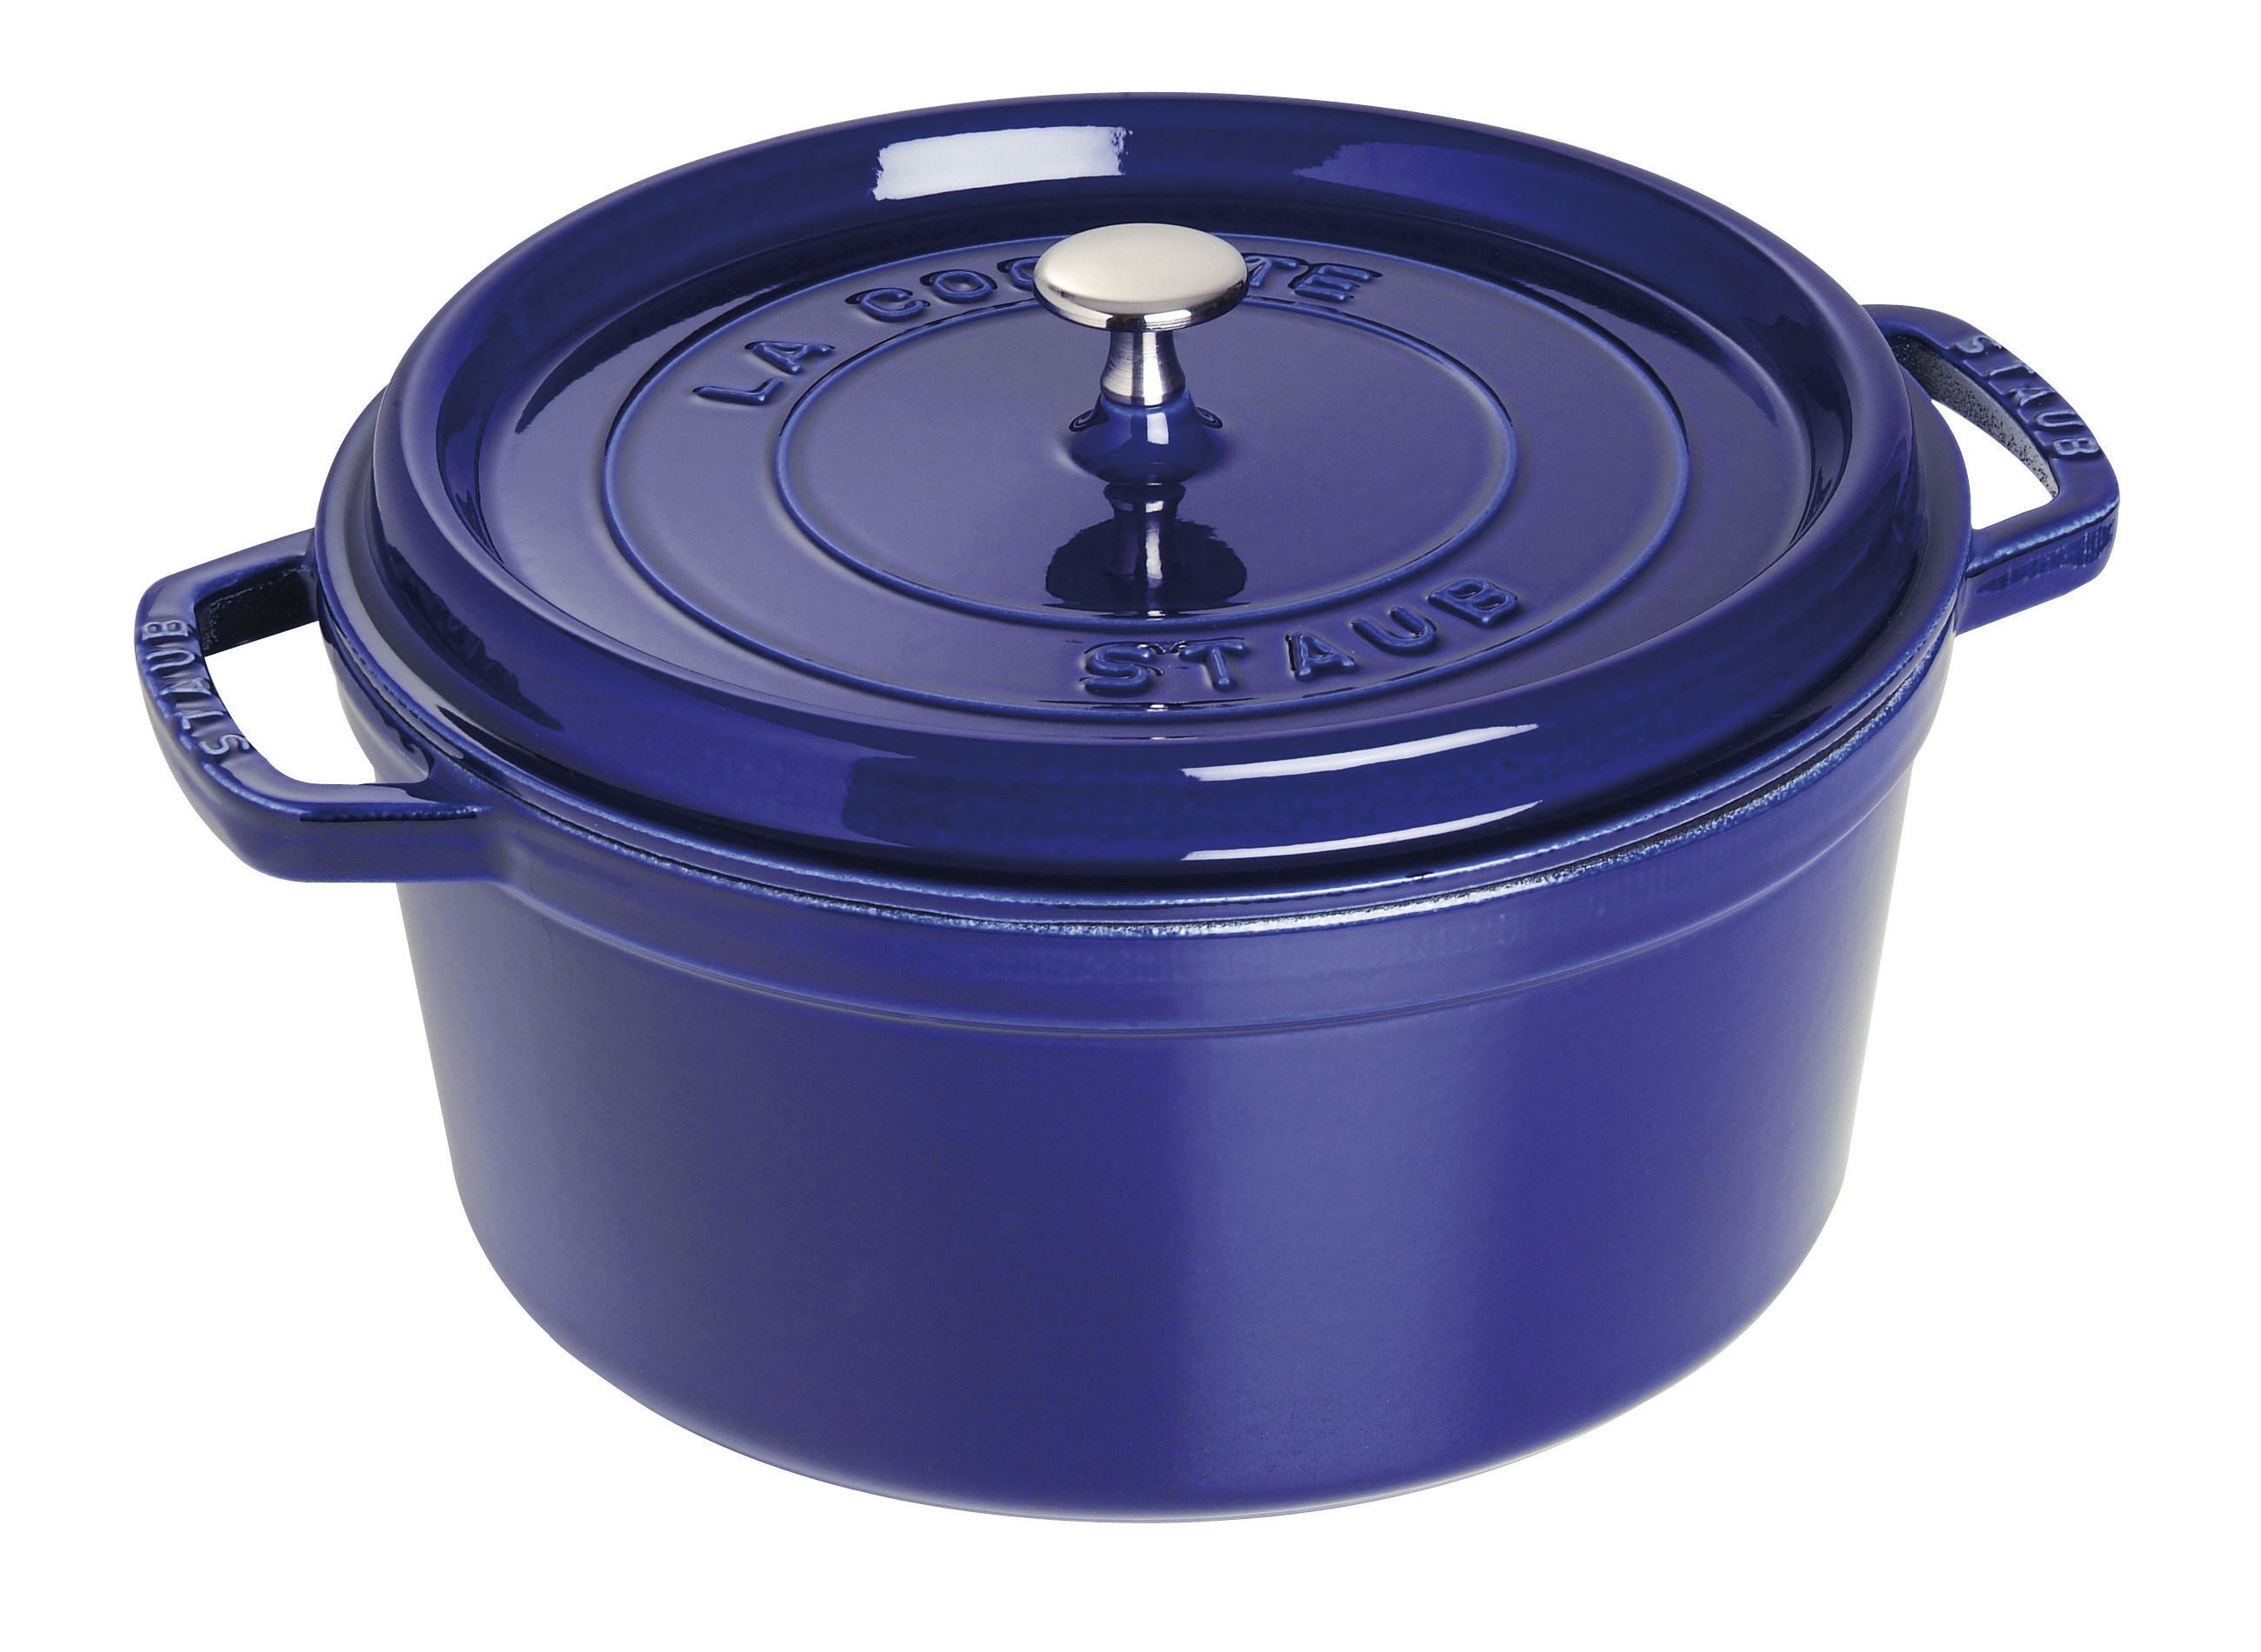 Blog - Tips & Advice: How to Use & Care for Staub